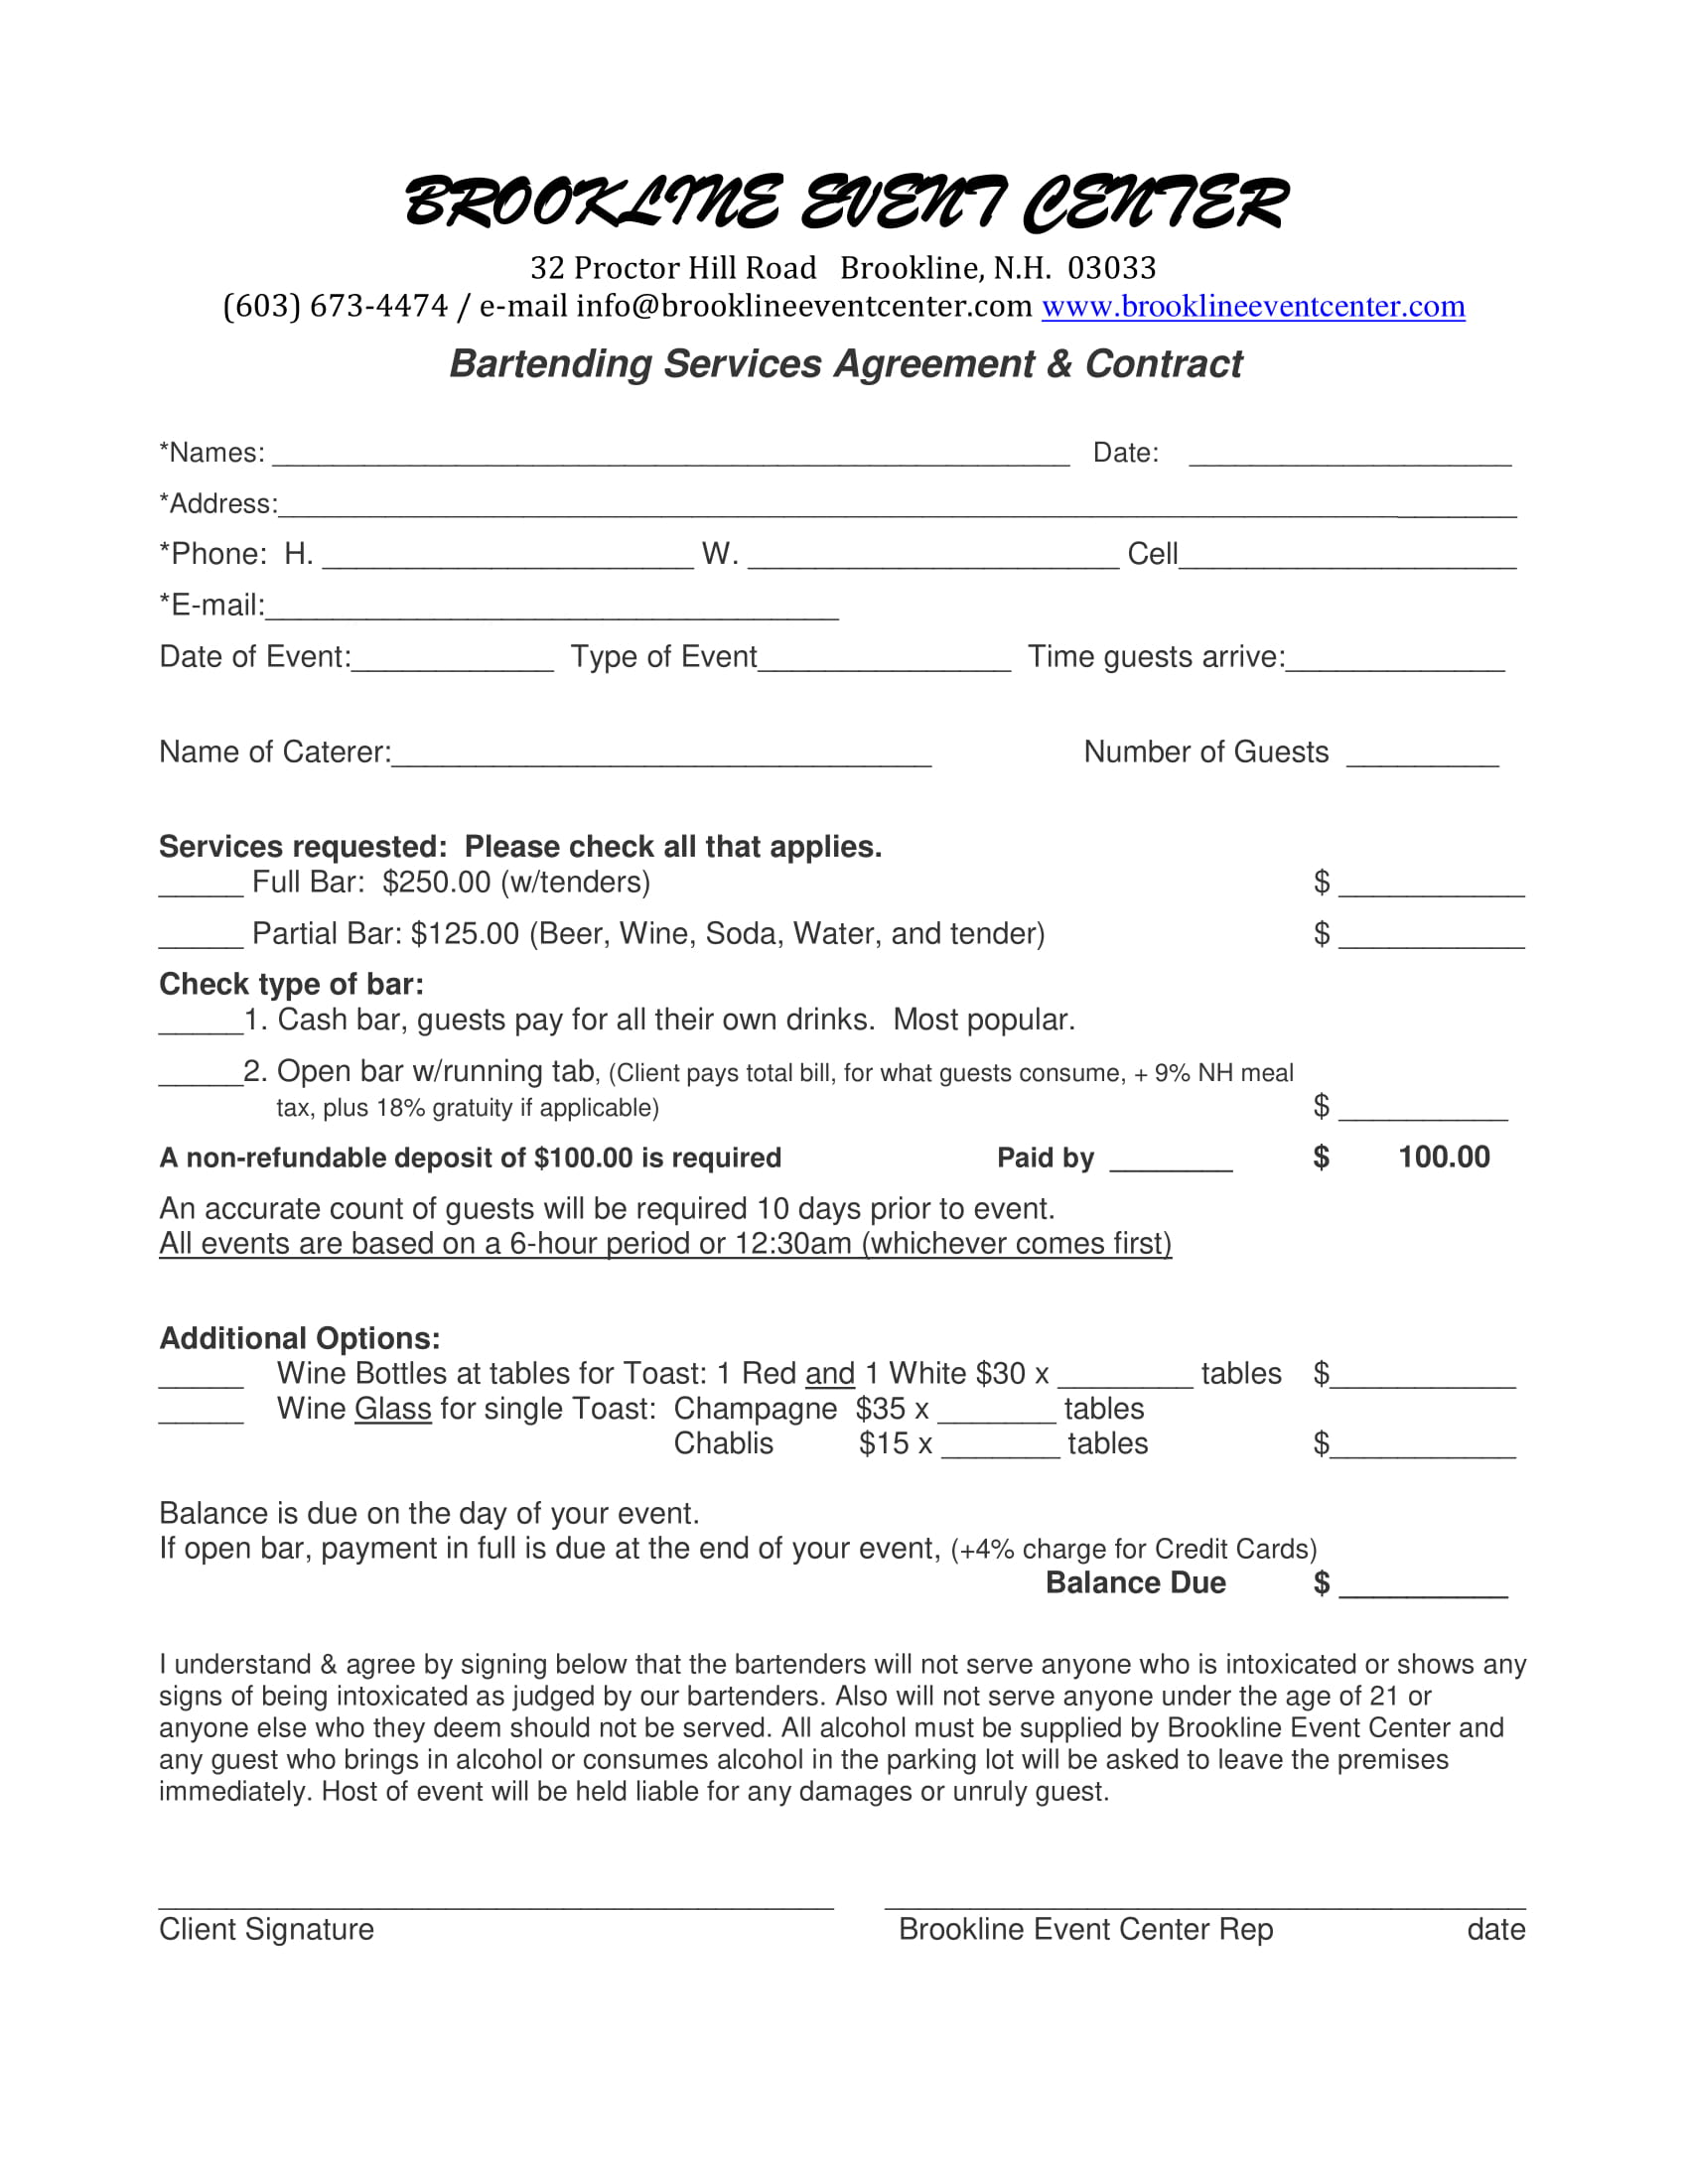 bartending services agreement contract form 2